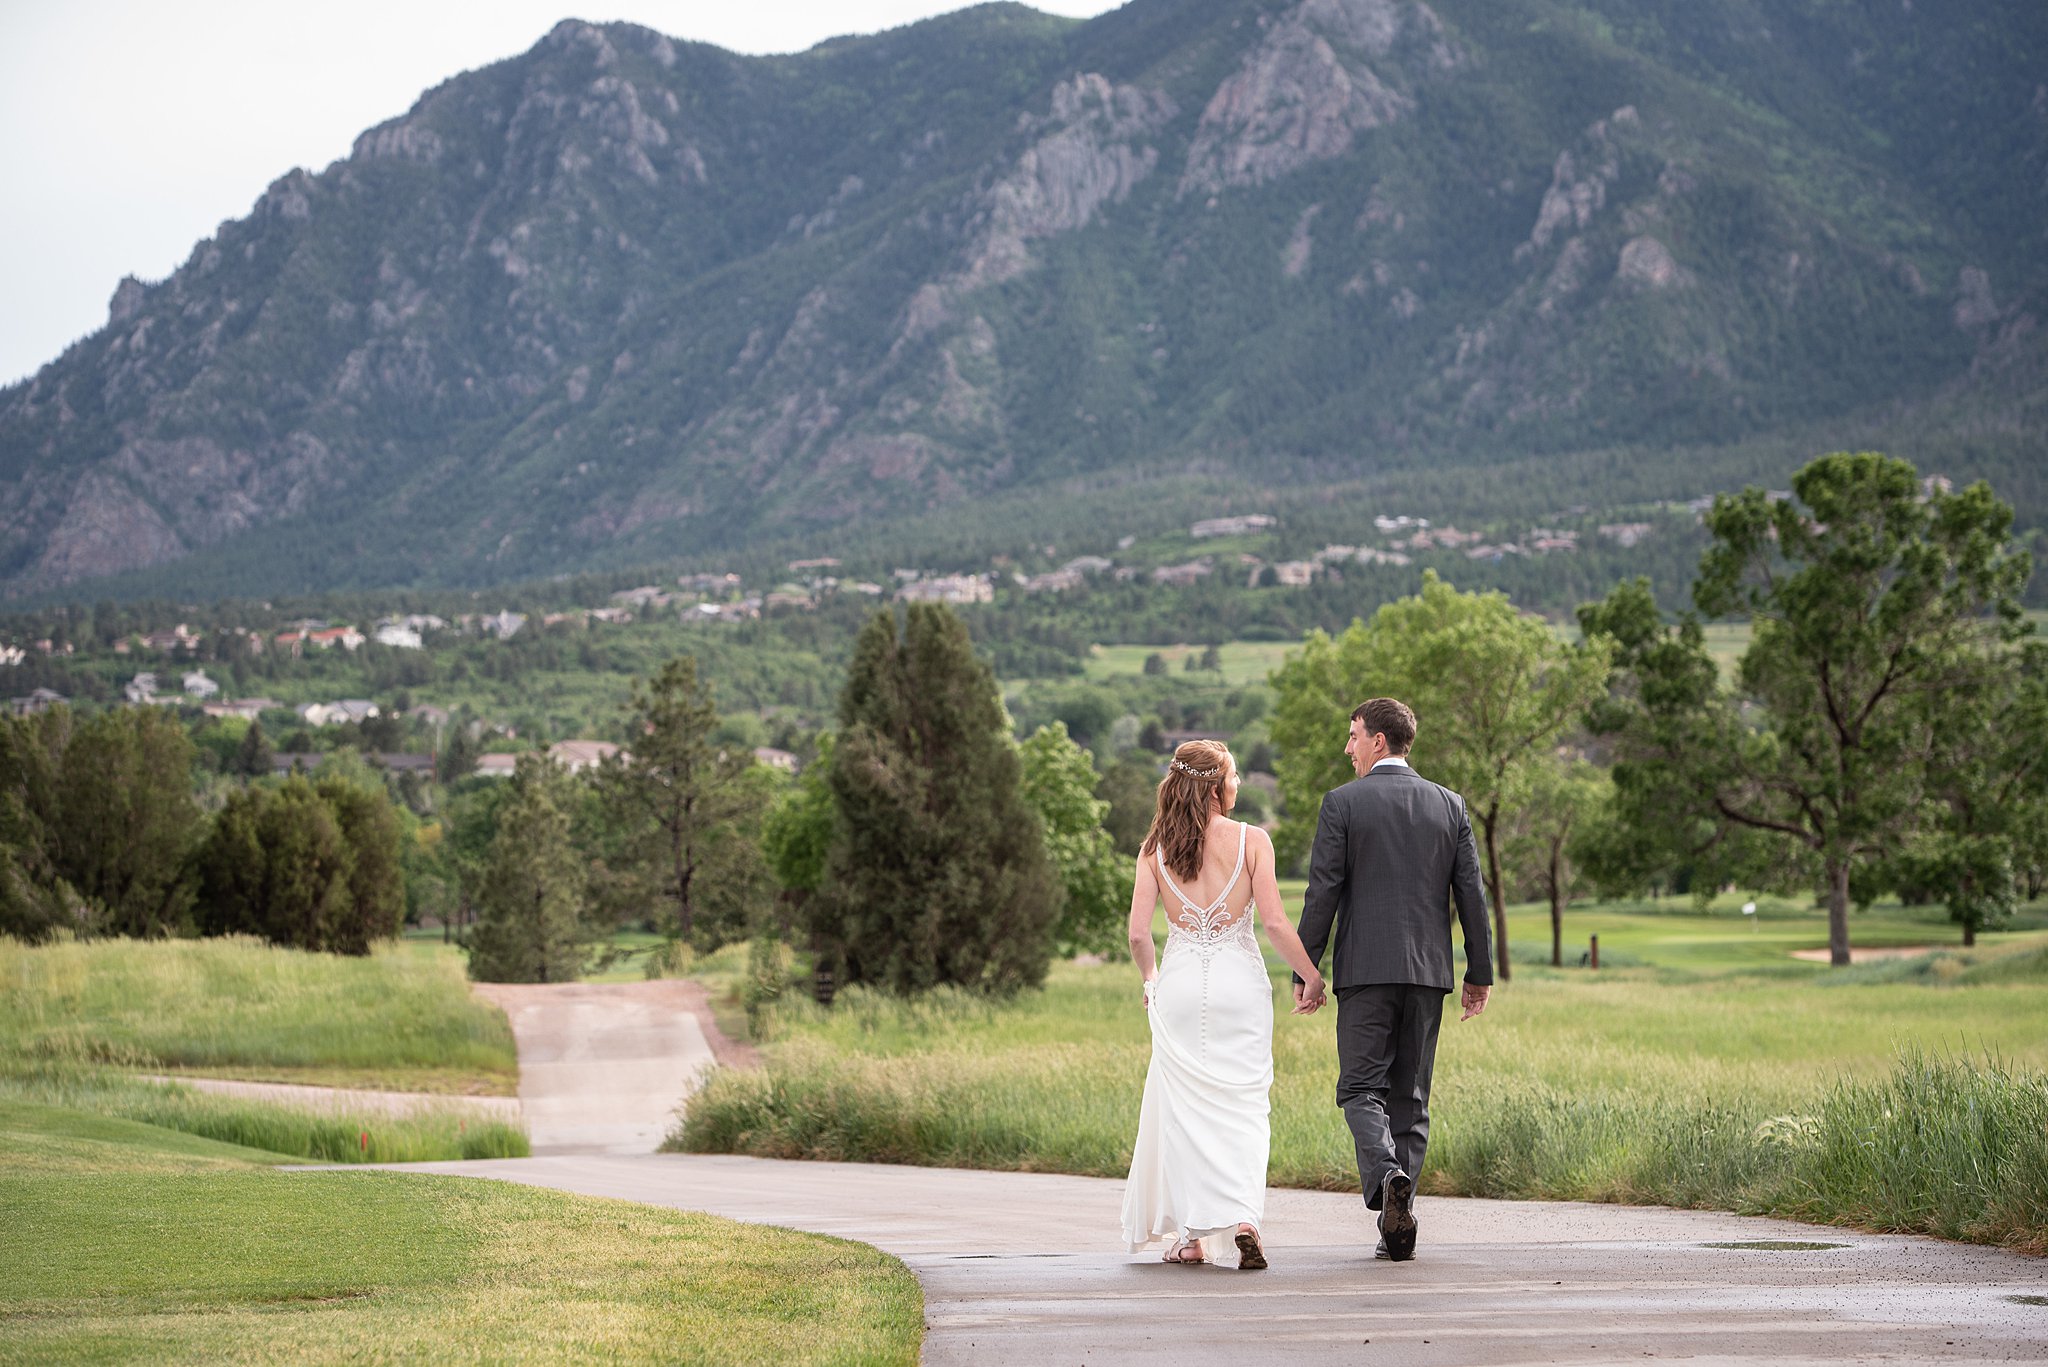 Bride and groom walk down a concrete path through a fields of grass with a mountain backdrop Cheyenne Mountain Resort